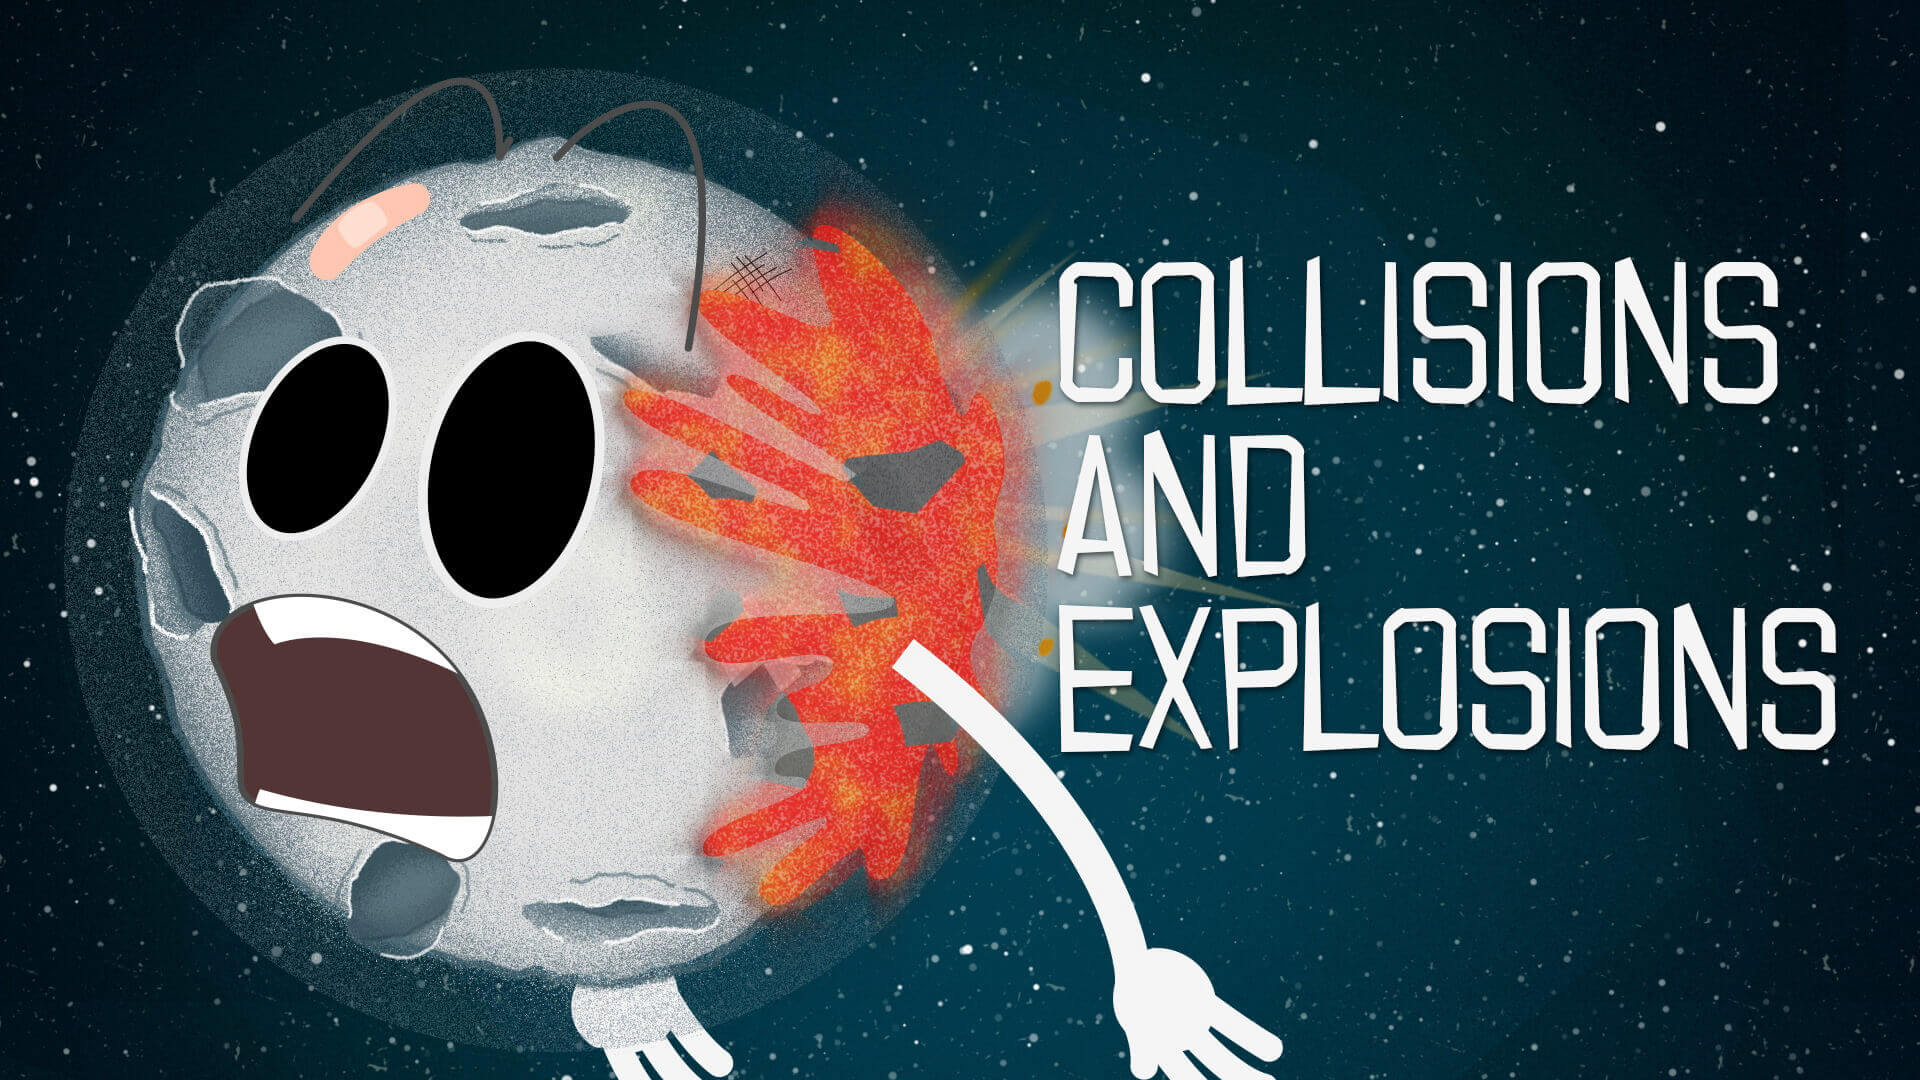 Education animation for children for Royal Observatory Greenwich - Collisions and Explosions